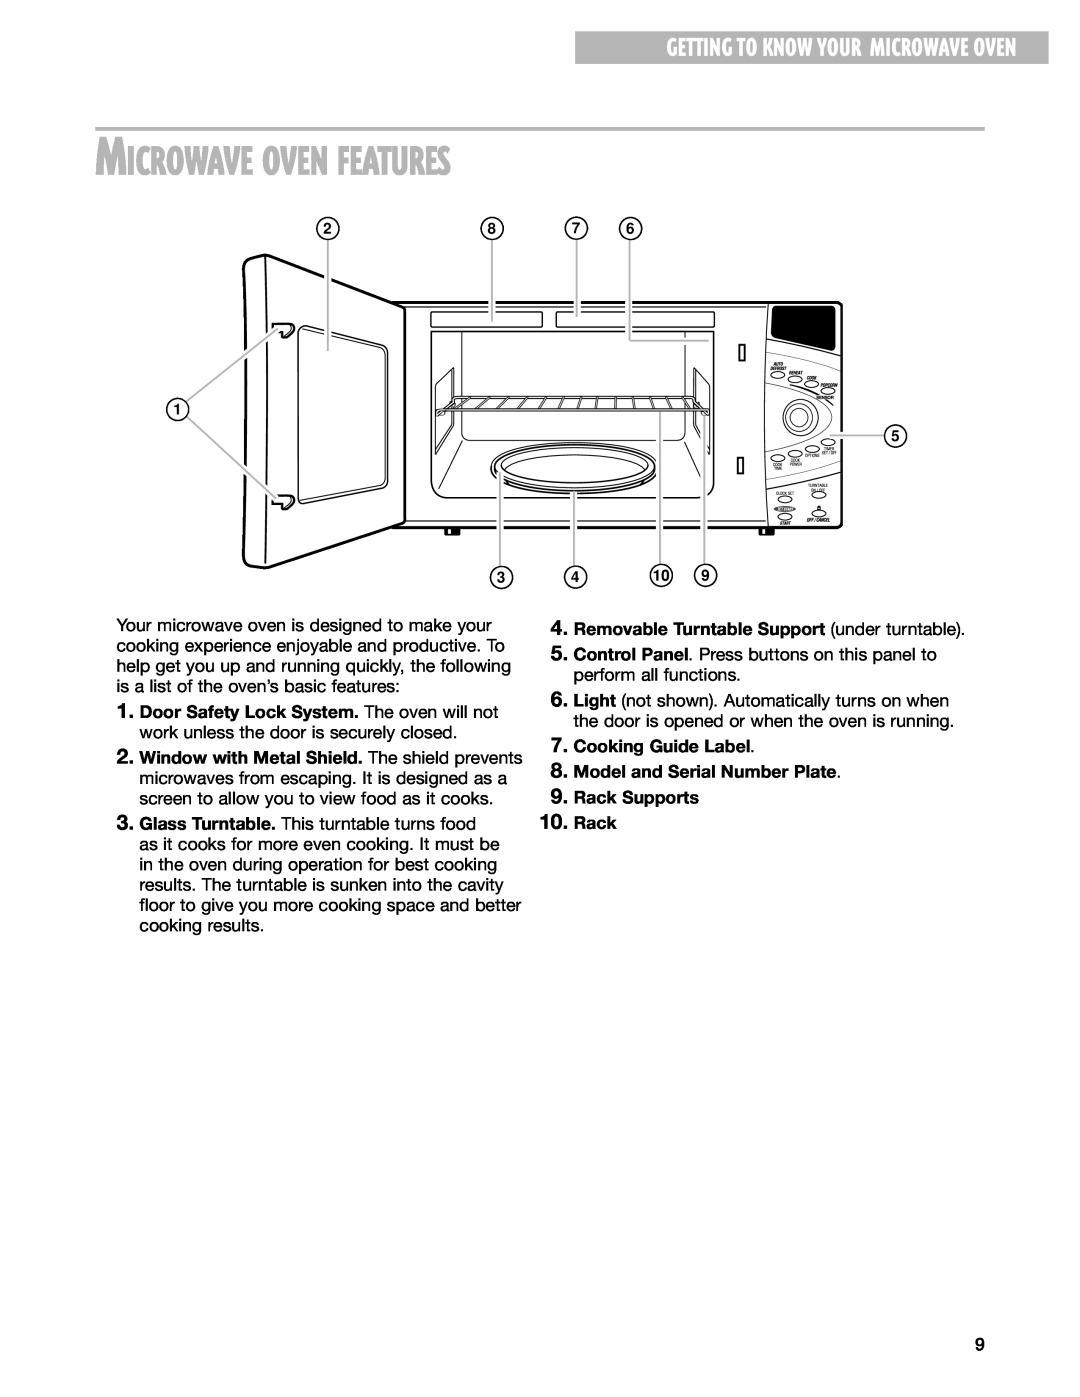 Whirlpool MT3185SH installation instructions Microwave Oven Features, Getting To Know Your Microwave Oven 